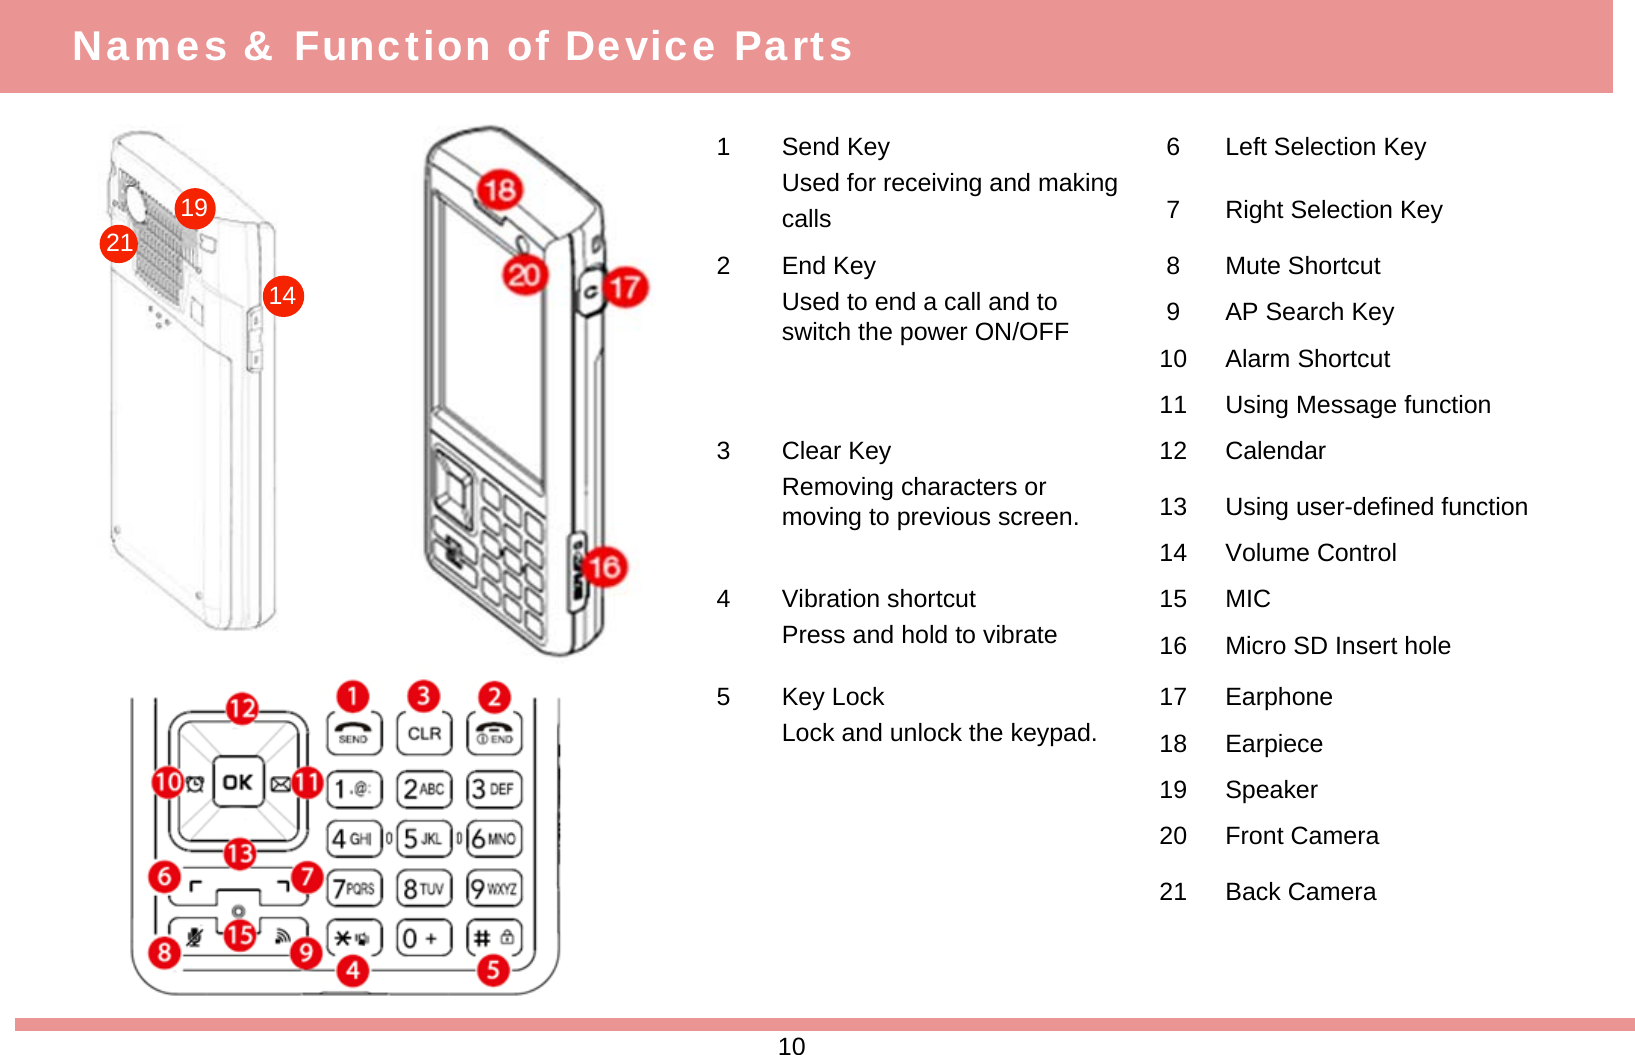 Names &amp; Function of Device Parts1 Send KeyUsed for receiving and makingcalls6 Left Selection Key7 Right Selection Key2 End KeyUsed to end a call and to switch the power ON/OFF8 Mute Shortcut9 AP Search Key10 Alarm Shortcut11 Using Message function3 Clear KeyRemoving characters or moving to previous screen.12 Calendar13 Using user-defined function14 Volume Control4 Vibration shortcutPress and hold to vibrate15 MIC16 Micro SD Insert hole5 Key LockLock and unlock the keypad.17 Earphone18 Earpiece19 Speaker20 Front Camera21 Back Camera10211914